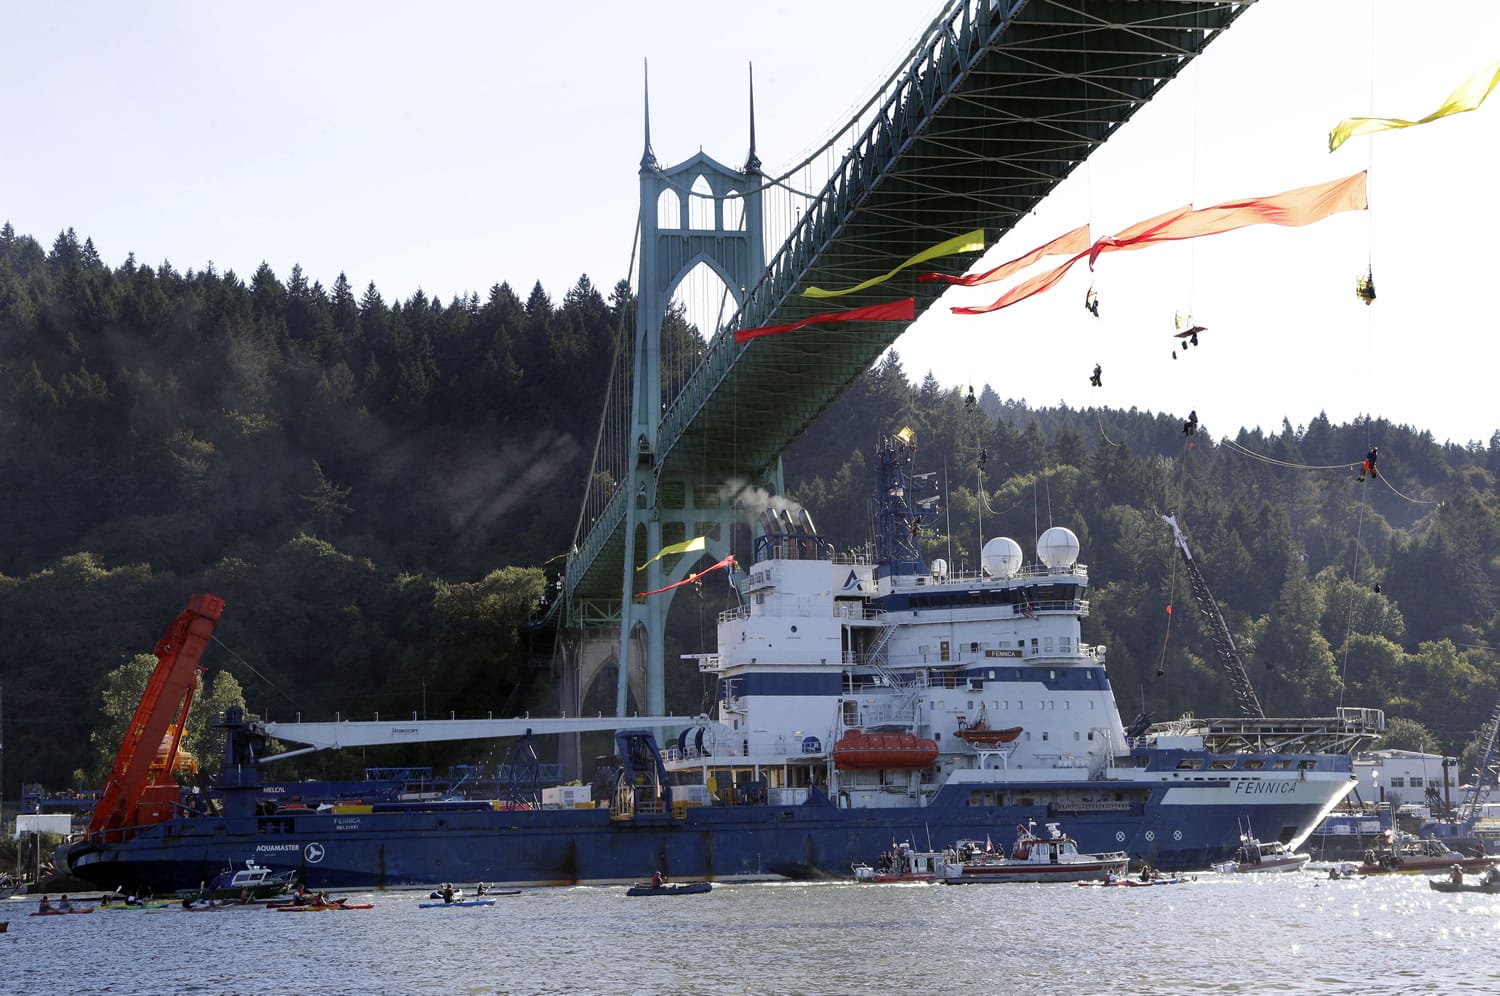 The Royal Dutch Shell PLC icebreaker Fennica heads up the Willamette River in July in Portland as protesters hang from the St. Johns Bridge on its way to Alaska. Royal Dutch Shell will cease exploration in Arctic waters off Alaska&#039;s coast following disappointing results from an exploratory well.